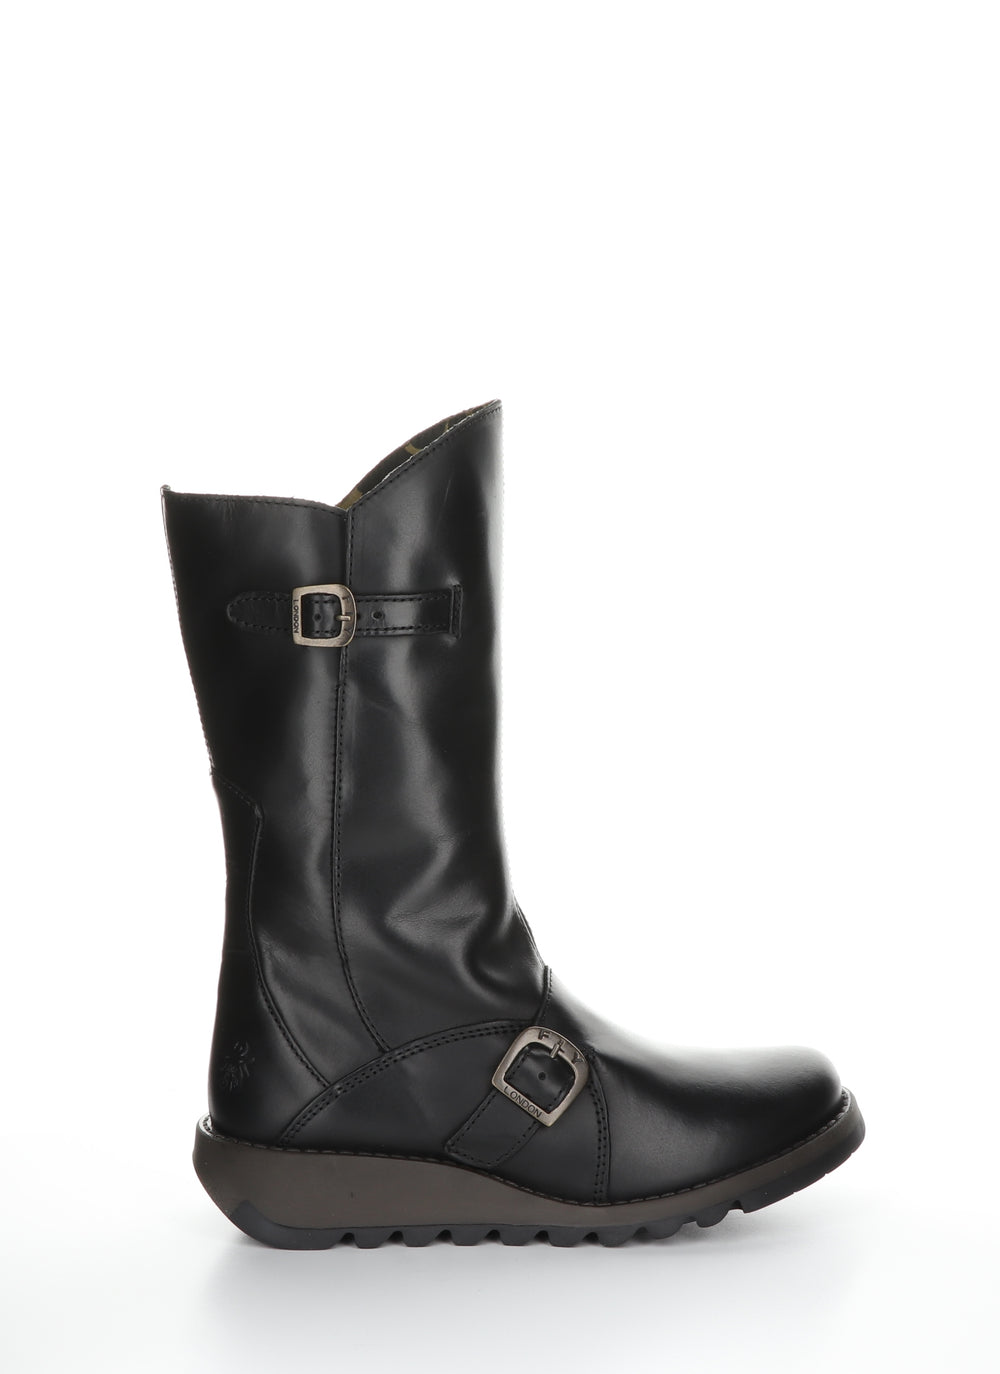 MES 2 BLACK Buckle Boots